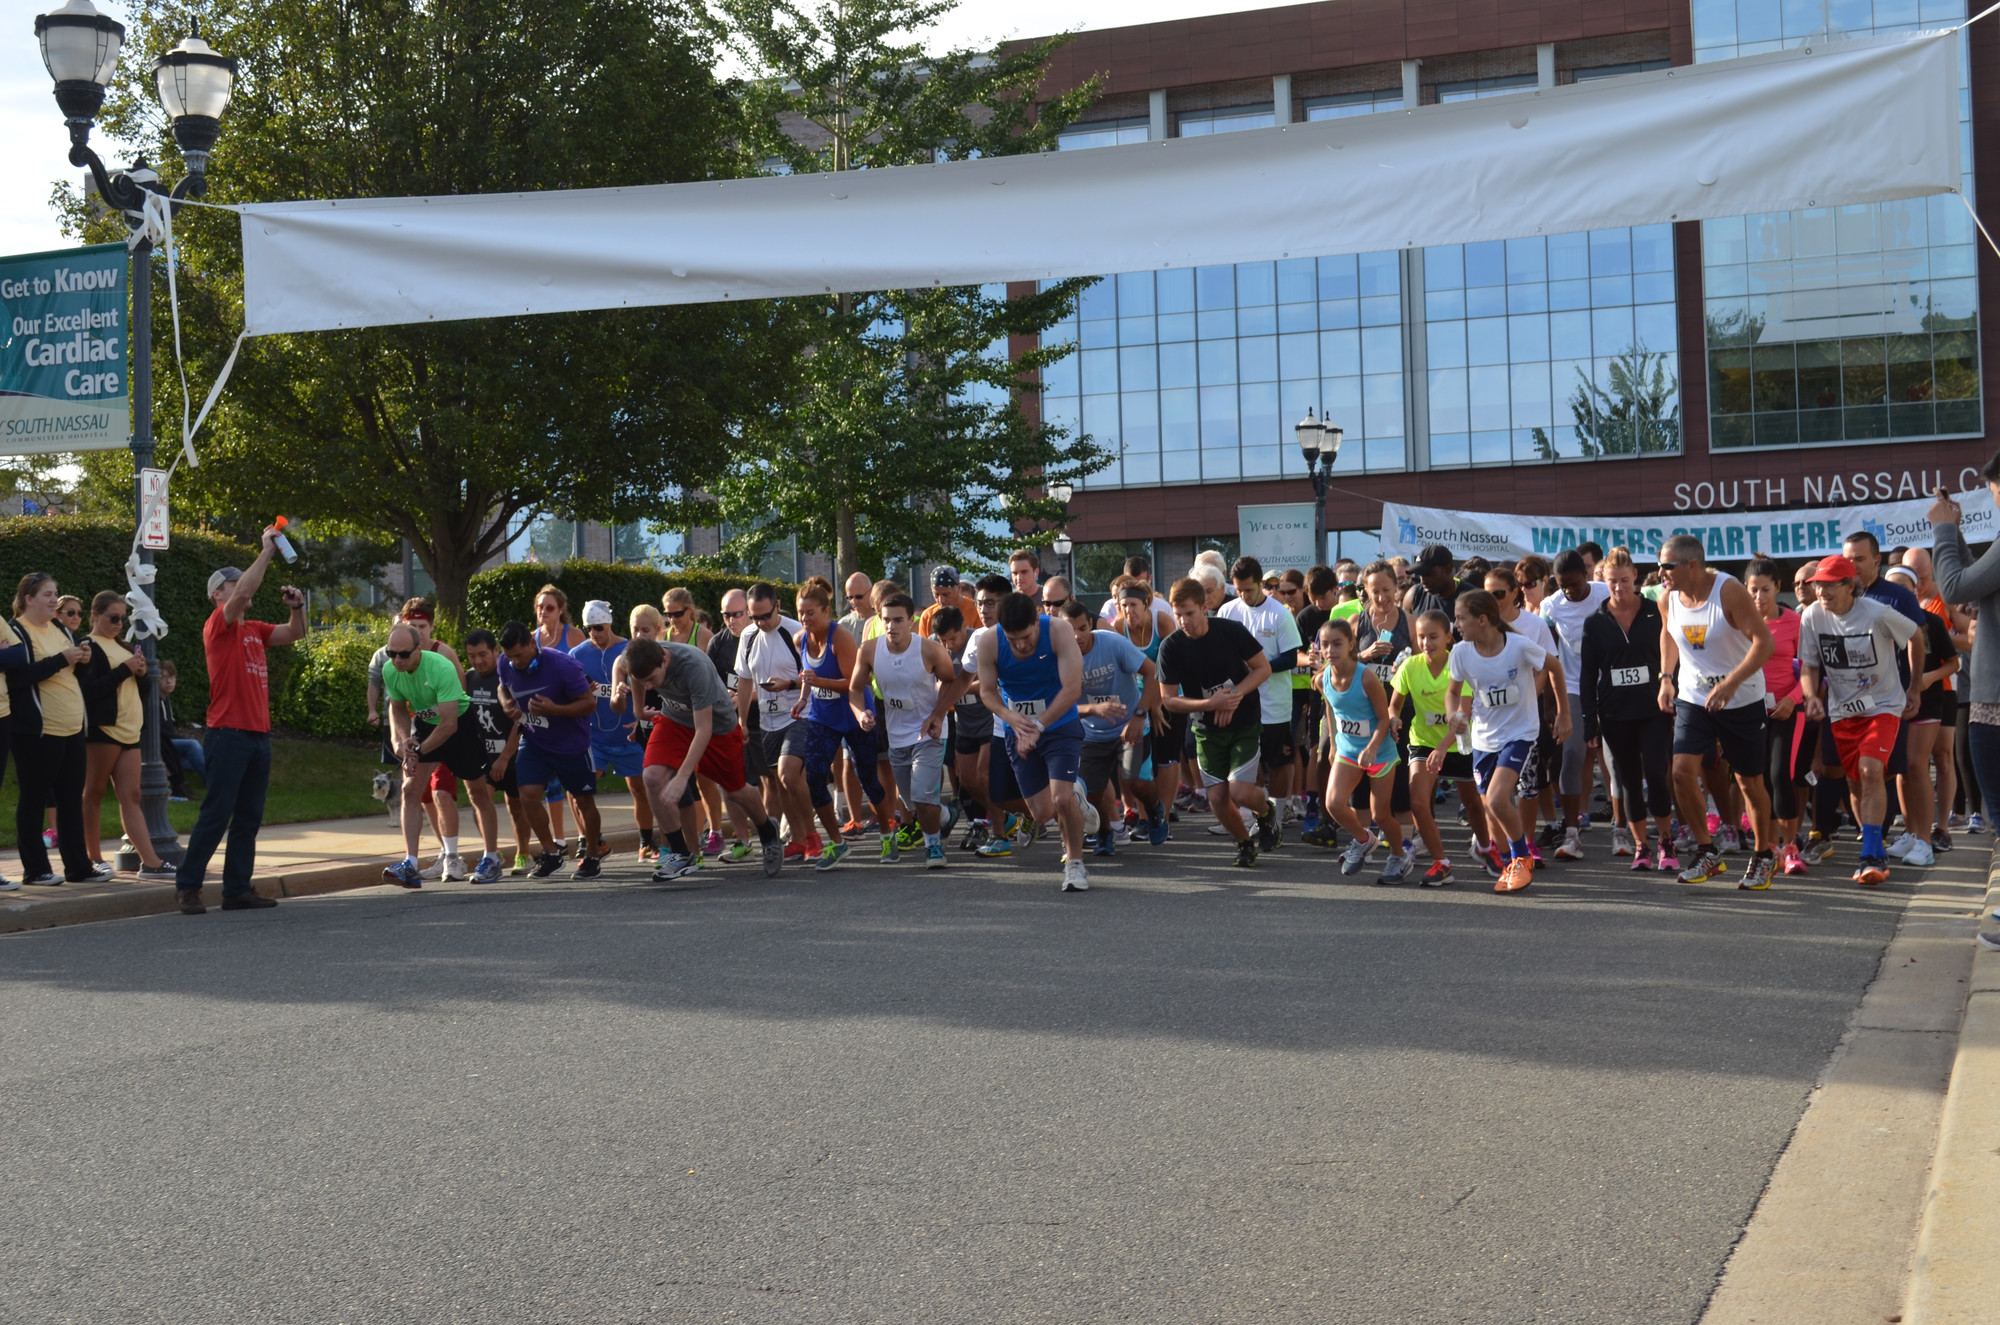 And they’re off at the start of the South Nassau Communities Hospital 5k Run/Walk. (Tim Baker/Herald)